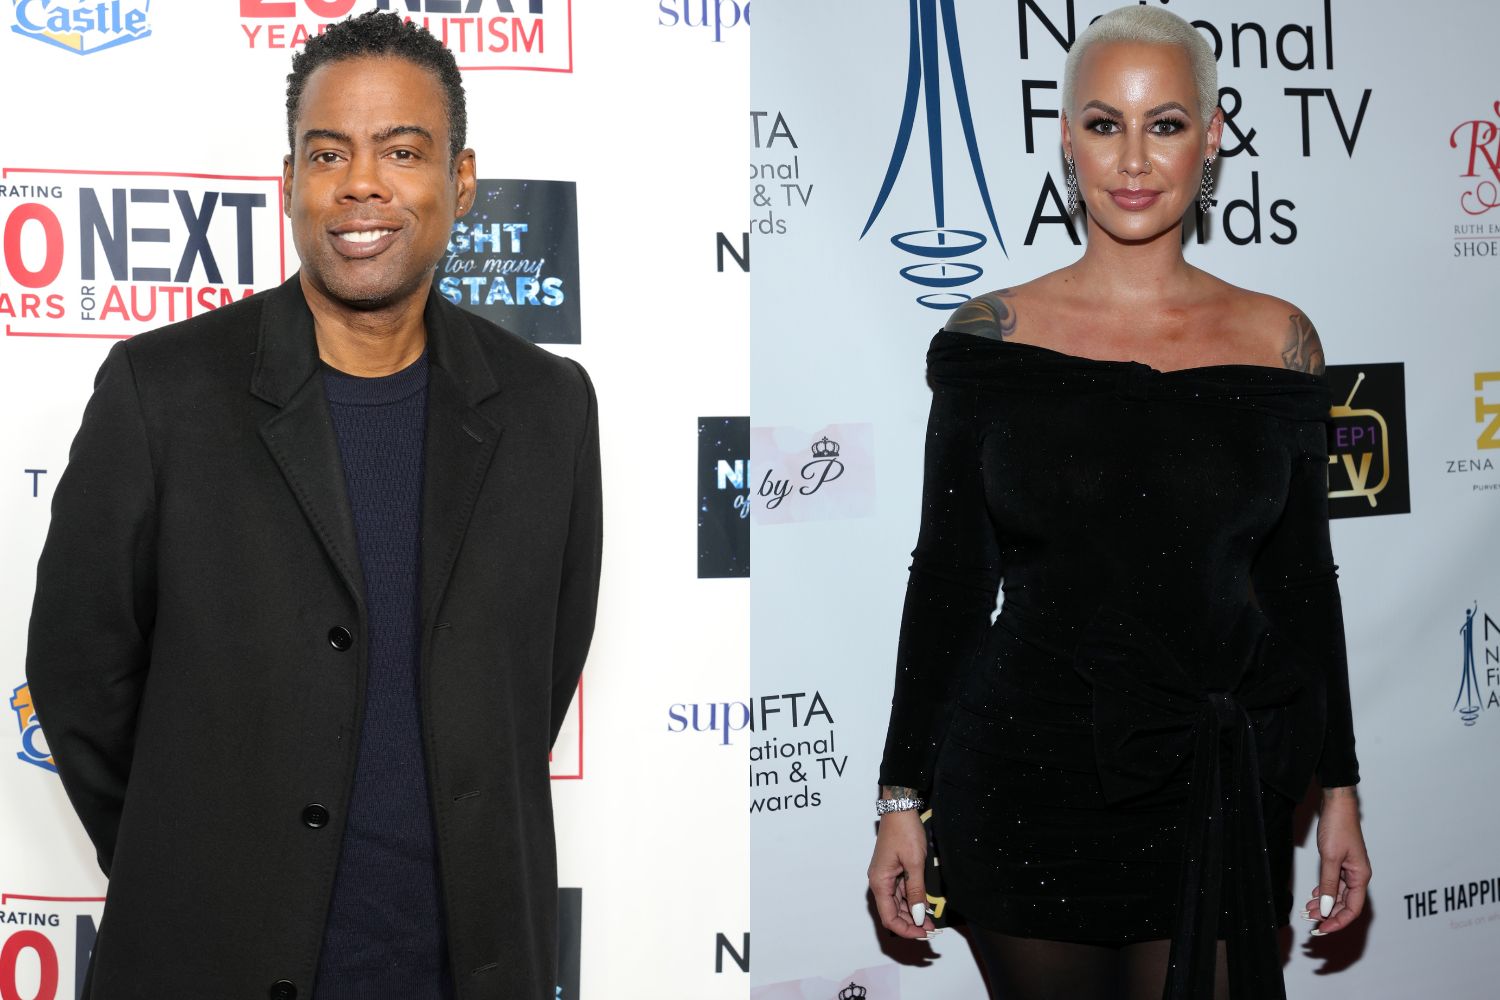 Period! Amber Rose Clarifies Alleged Romantic Relationship With Chris Rock (Video) thumbnail